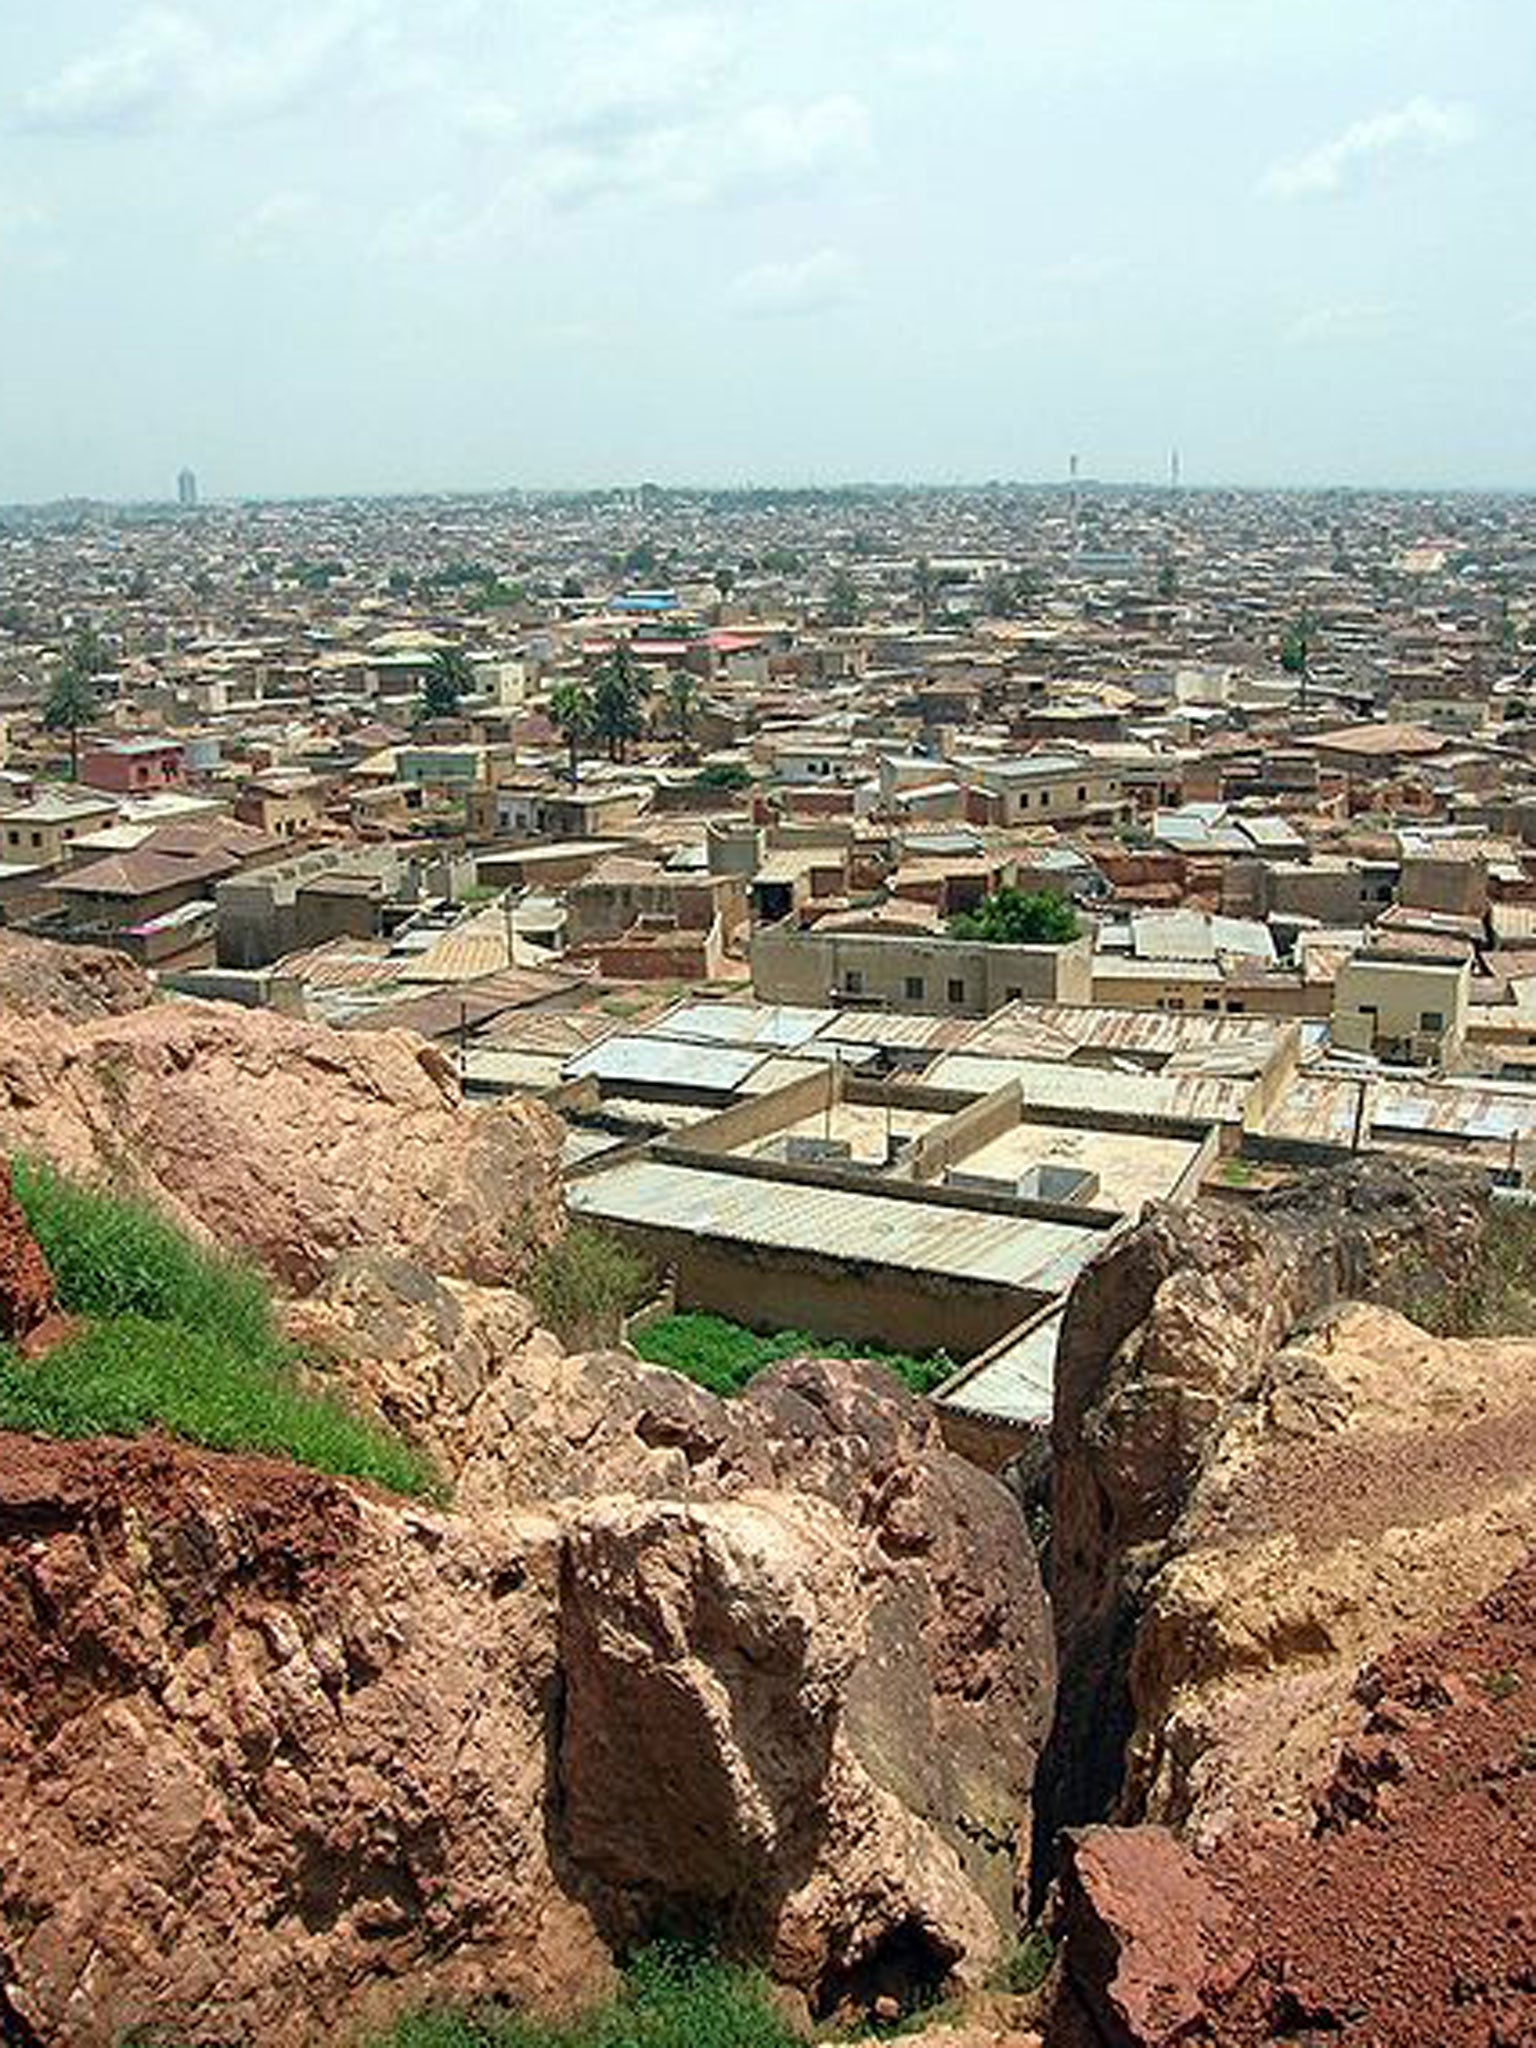 A view of Kano, in Nigeria where a 14-year-old girl forced into an arranged marriage has admitted to killing her husband and three of his friends